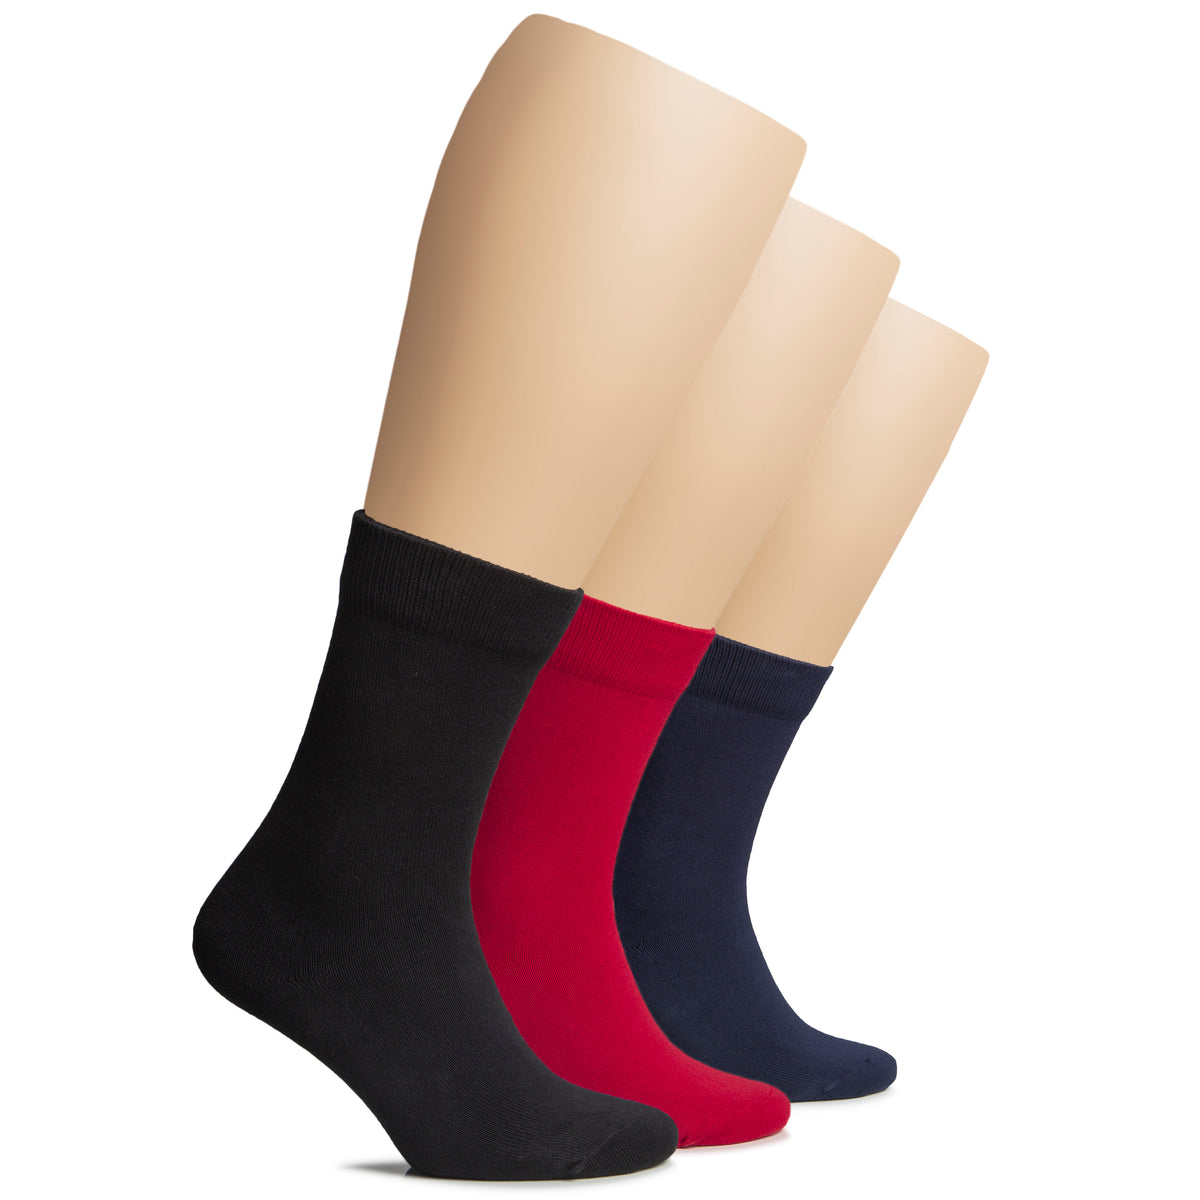 The picture shows three women's socks in different colors - blue, red, and black. These Women's Winter Cotton Crew Socks are ideal for keeping feet warm during winter.